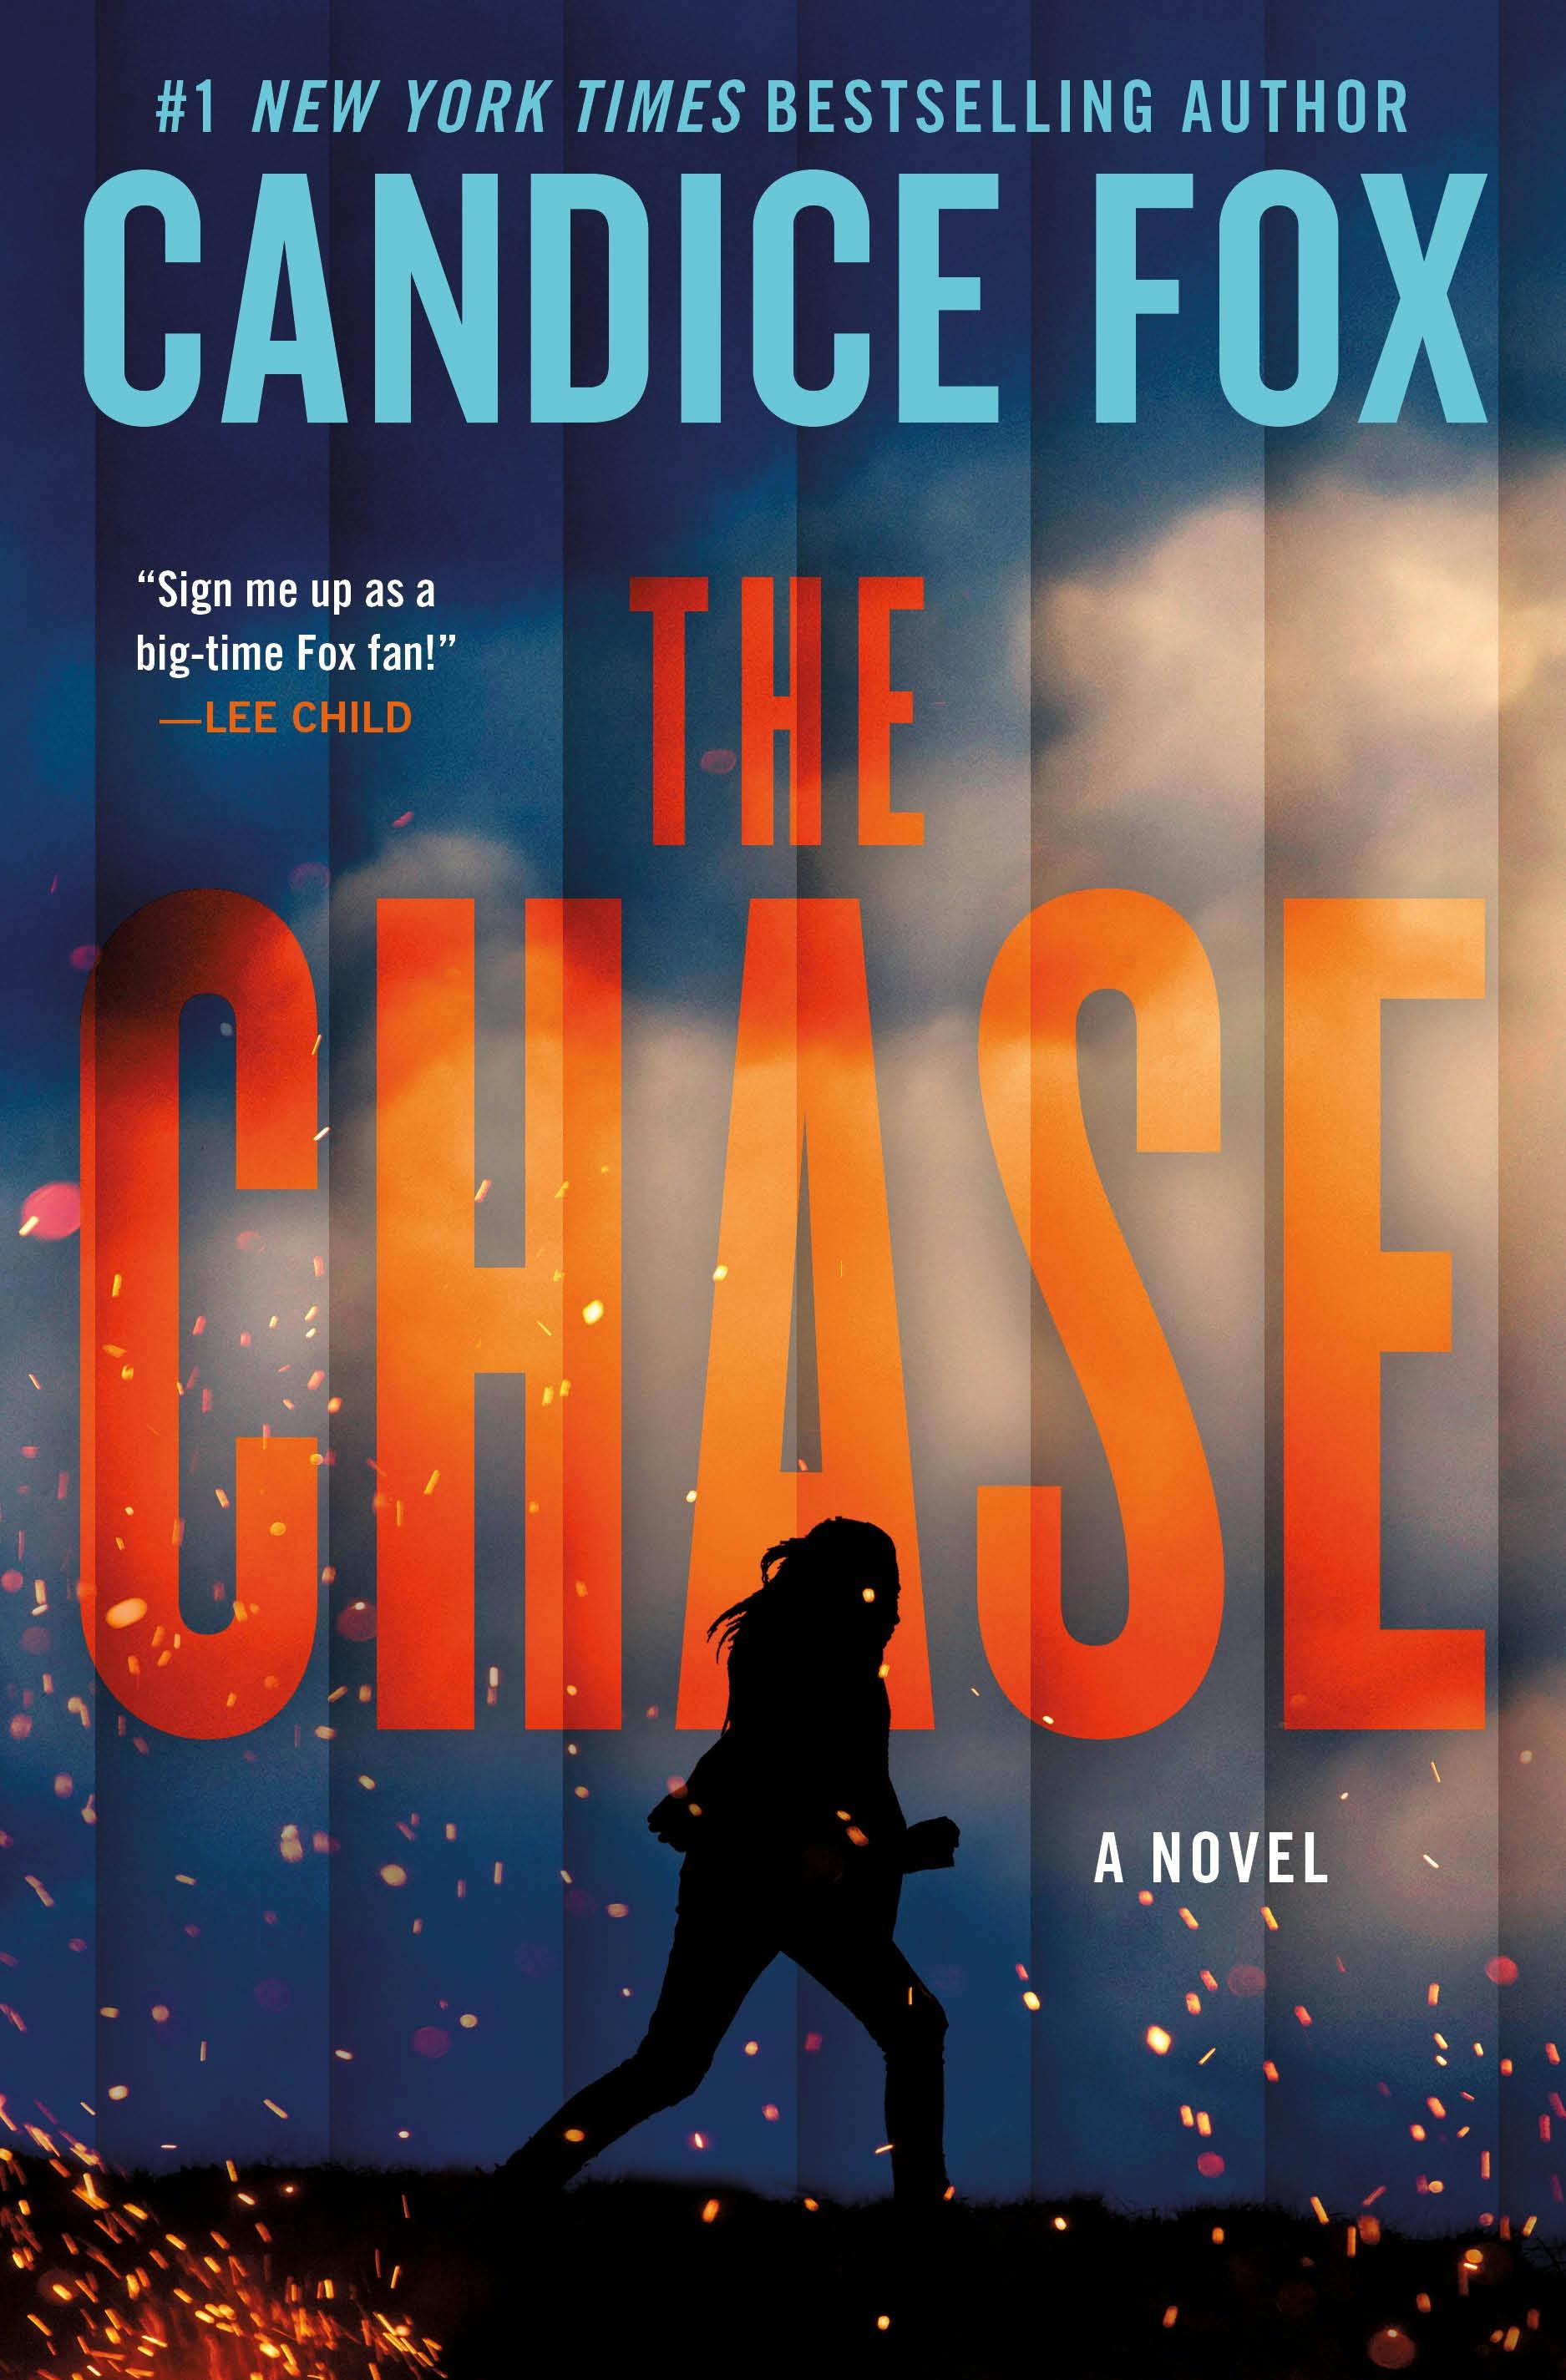 Cover for the book titled as: The Chase